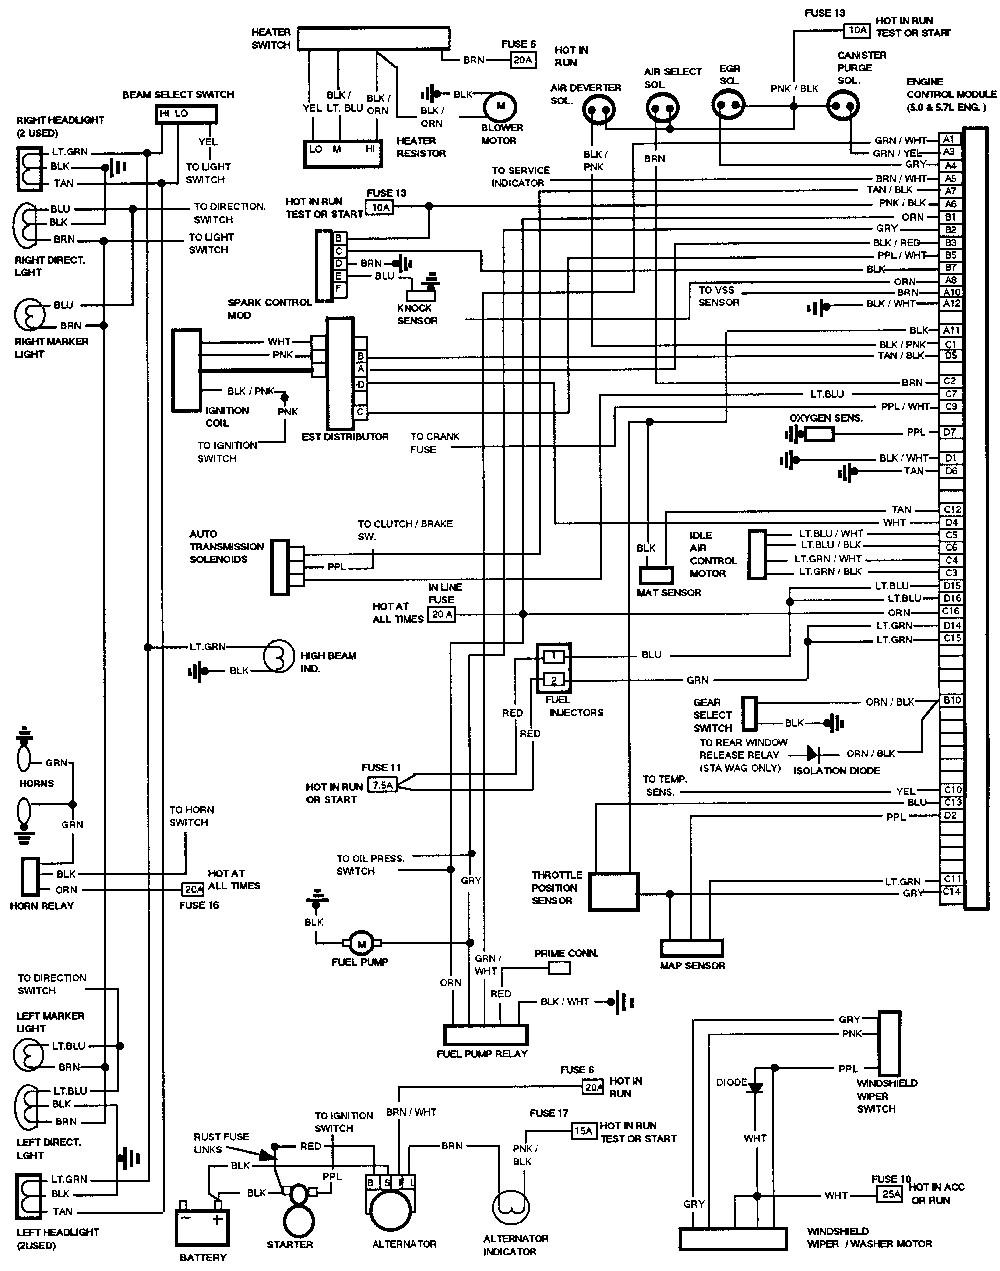 Freightliner Chassis Wiring Diagram Freightliner Rv Wiring Diagrams Wiring Diagrams Interval